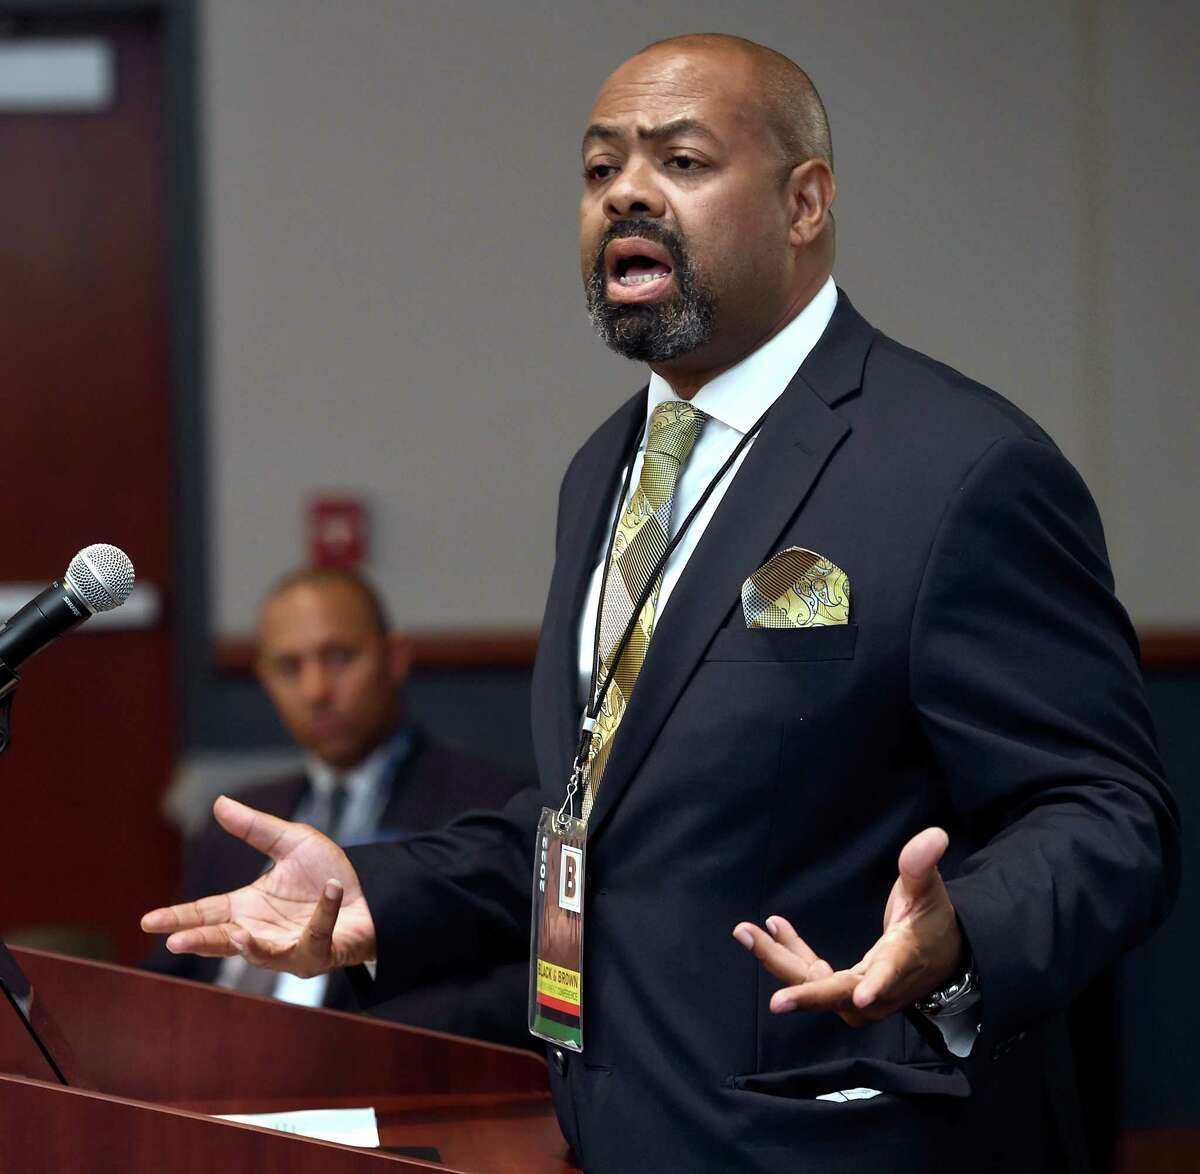 Attorney Michael Jefferson, founder of the Kiyama Movement, speaks at the 2nd annual Black & Brown Male Empowerment Conference at Southern Connecticut State University in New Haven on Oct. 4, 2022.